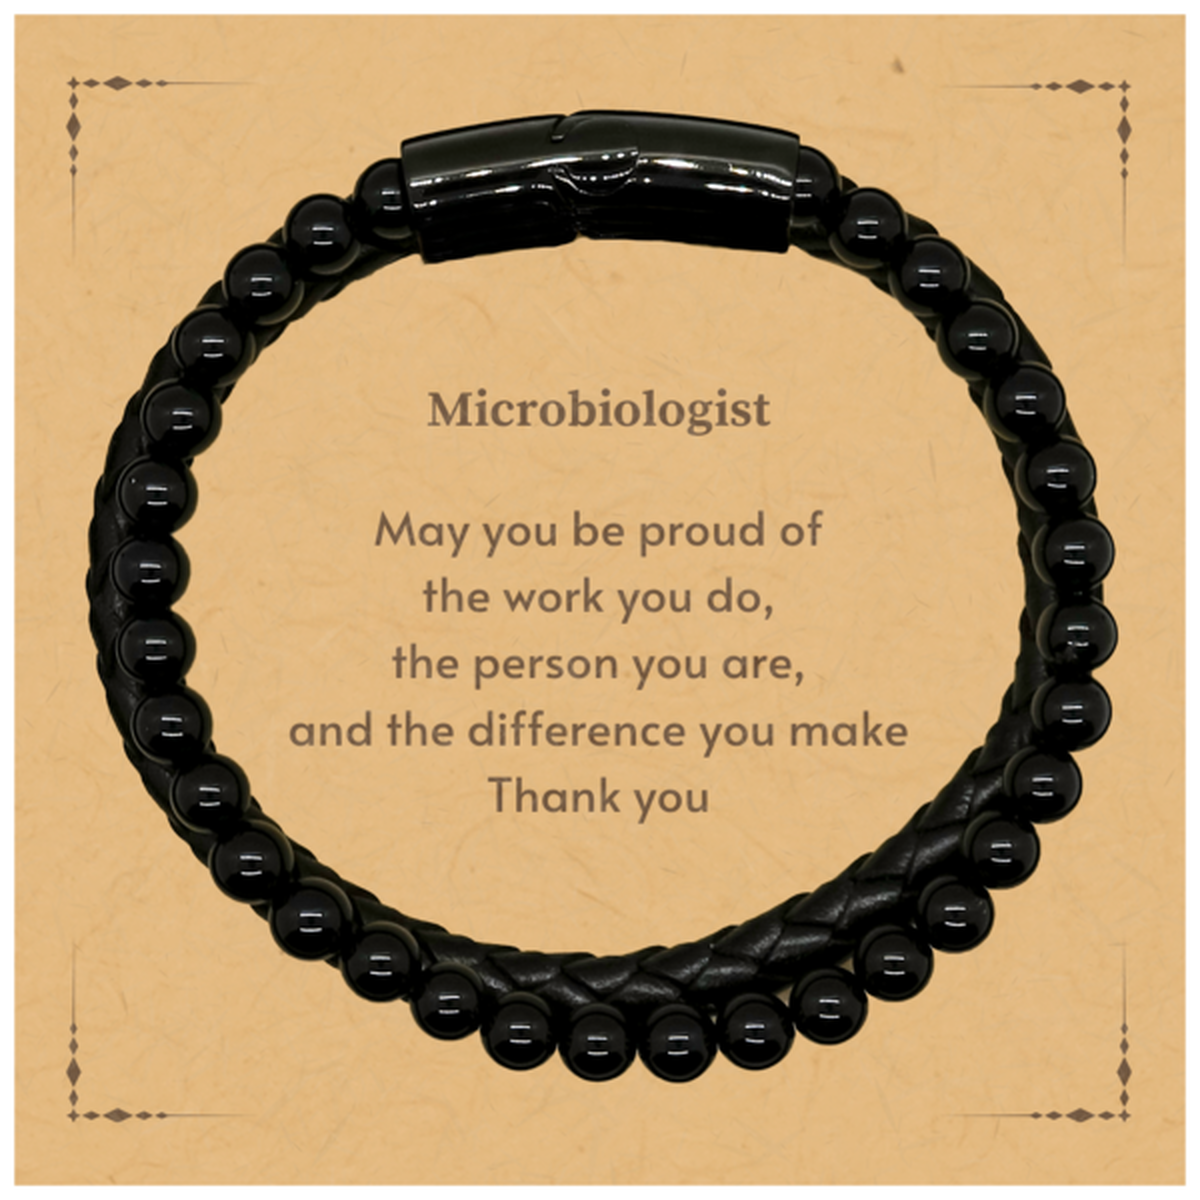 Heartwarming Stone Leather Bracelets Retirement Coworkers Gifts for Microbiologist, Microbiologist May You be proud of the work you do, the person you are Gifts for Boss Men Women Friends